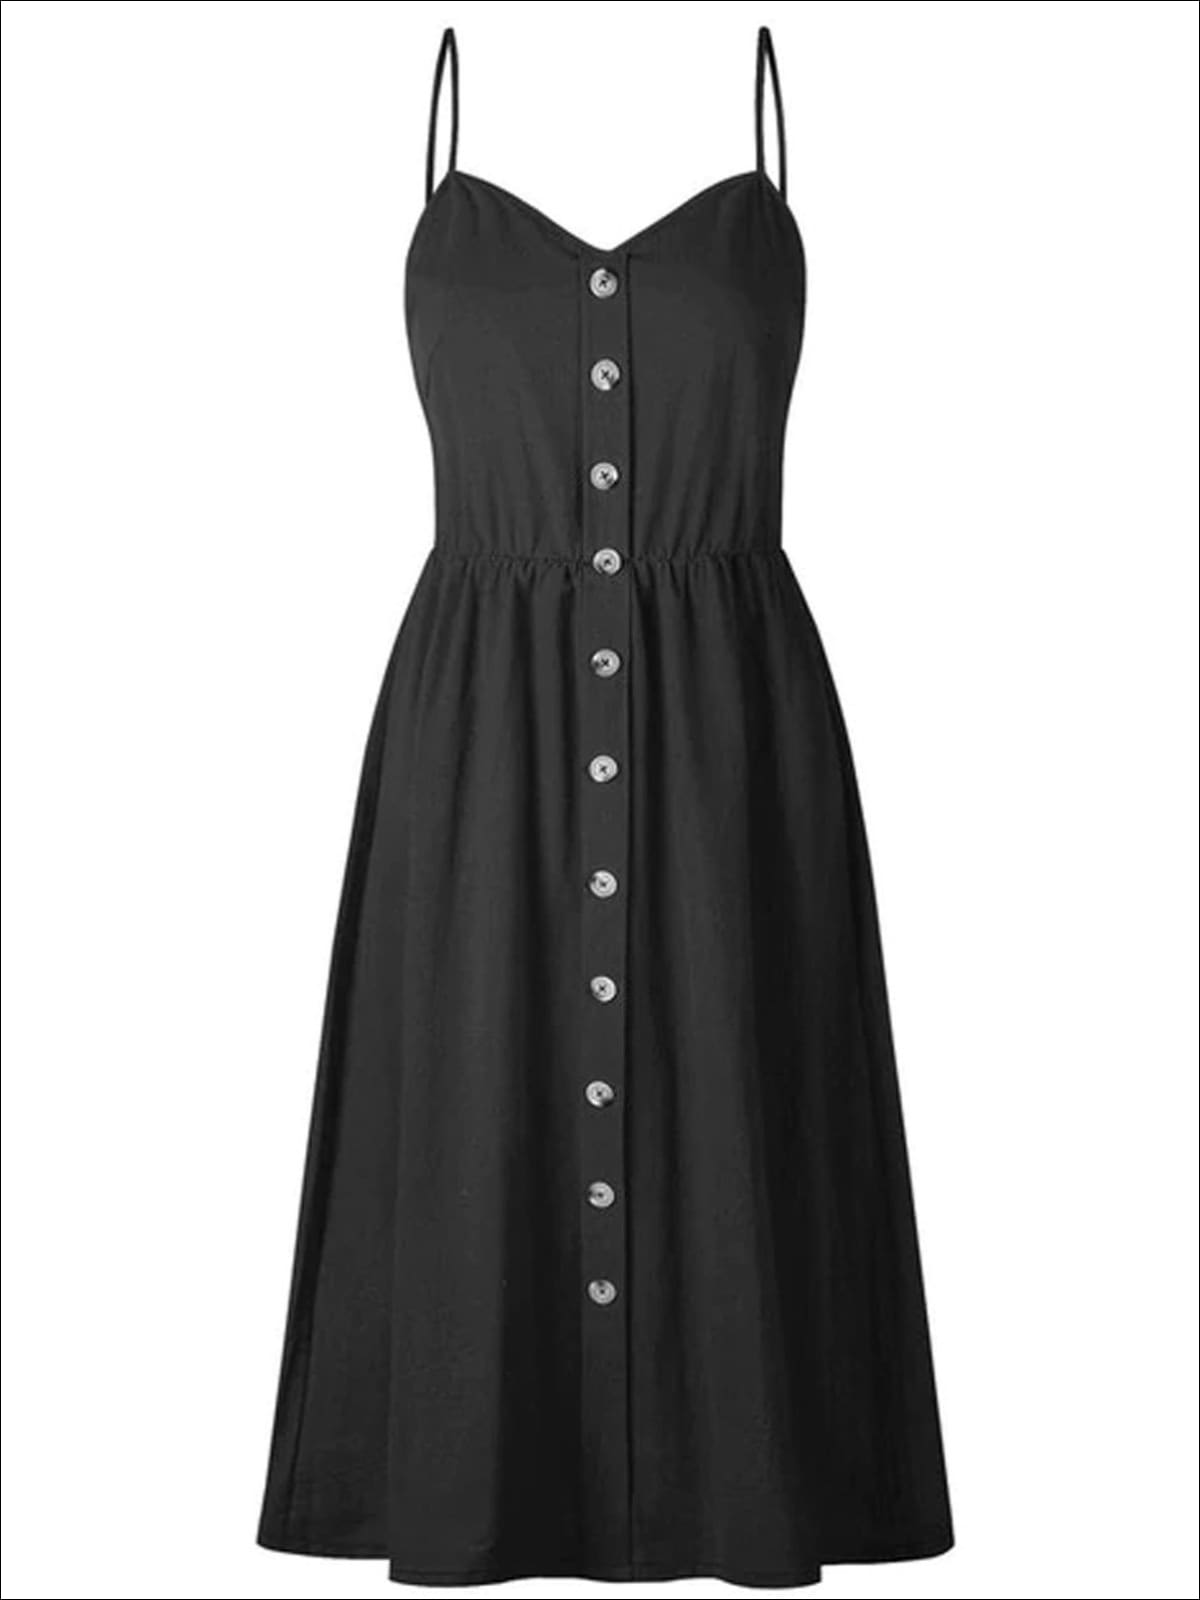 Womens Vintage Sleeveless Casual Dress With Front Pockets (Multiple Color Options) - Black / S - Womens Dresses